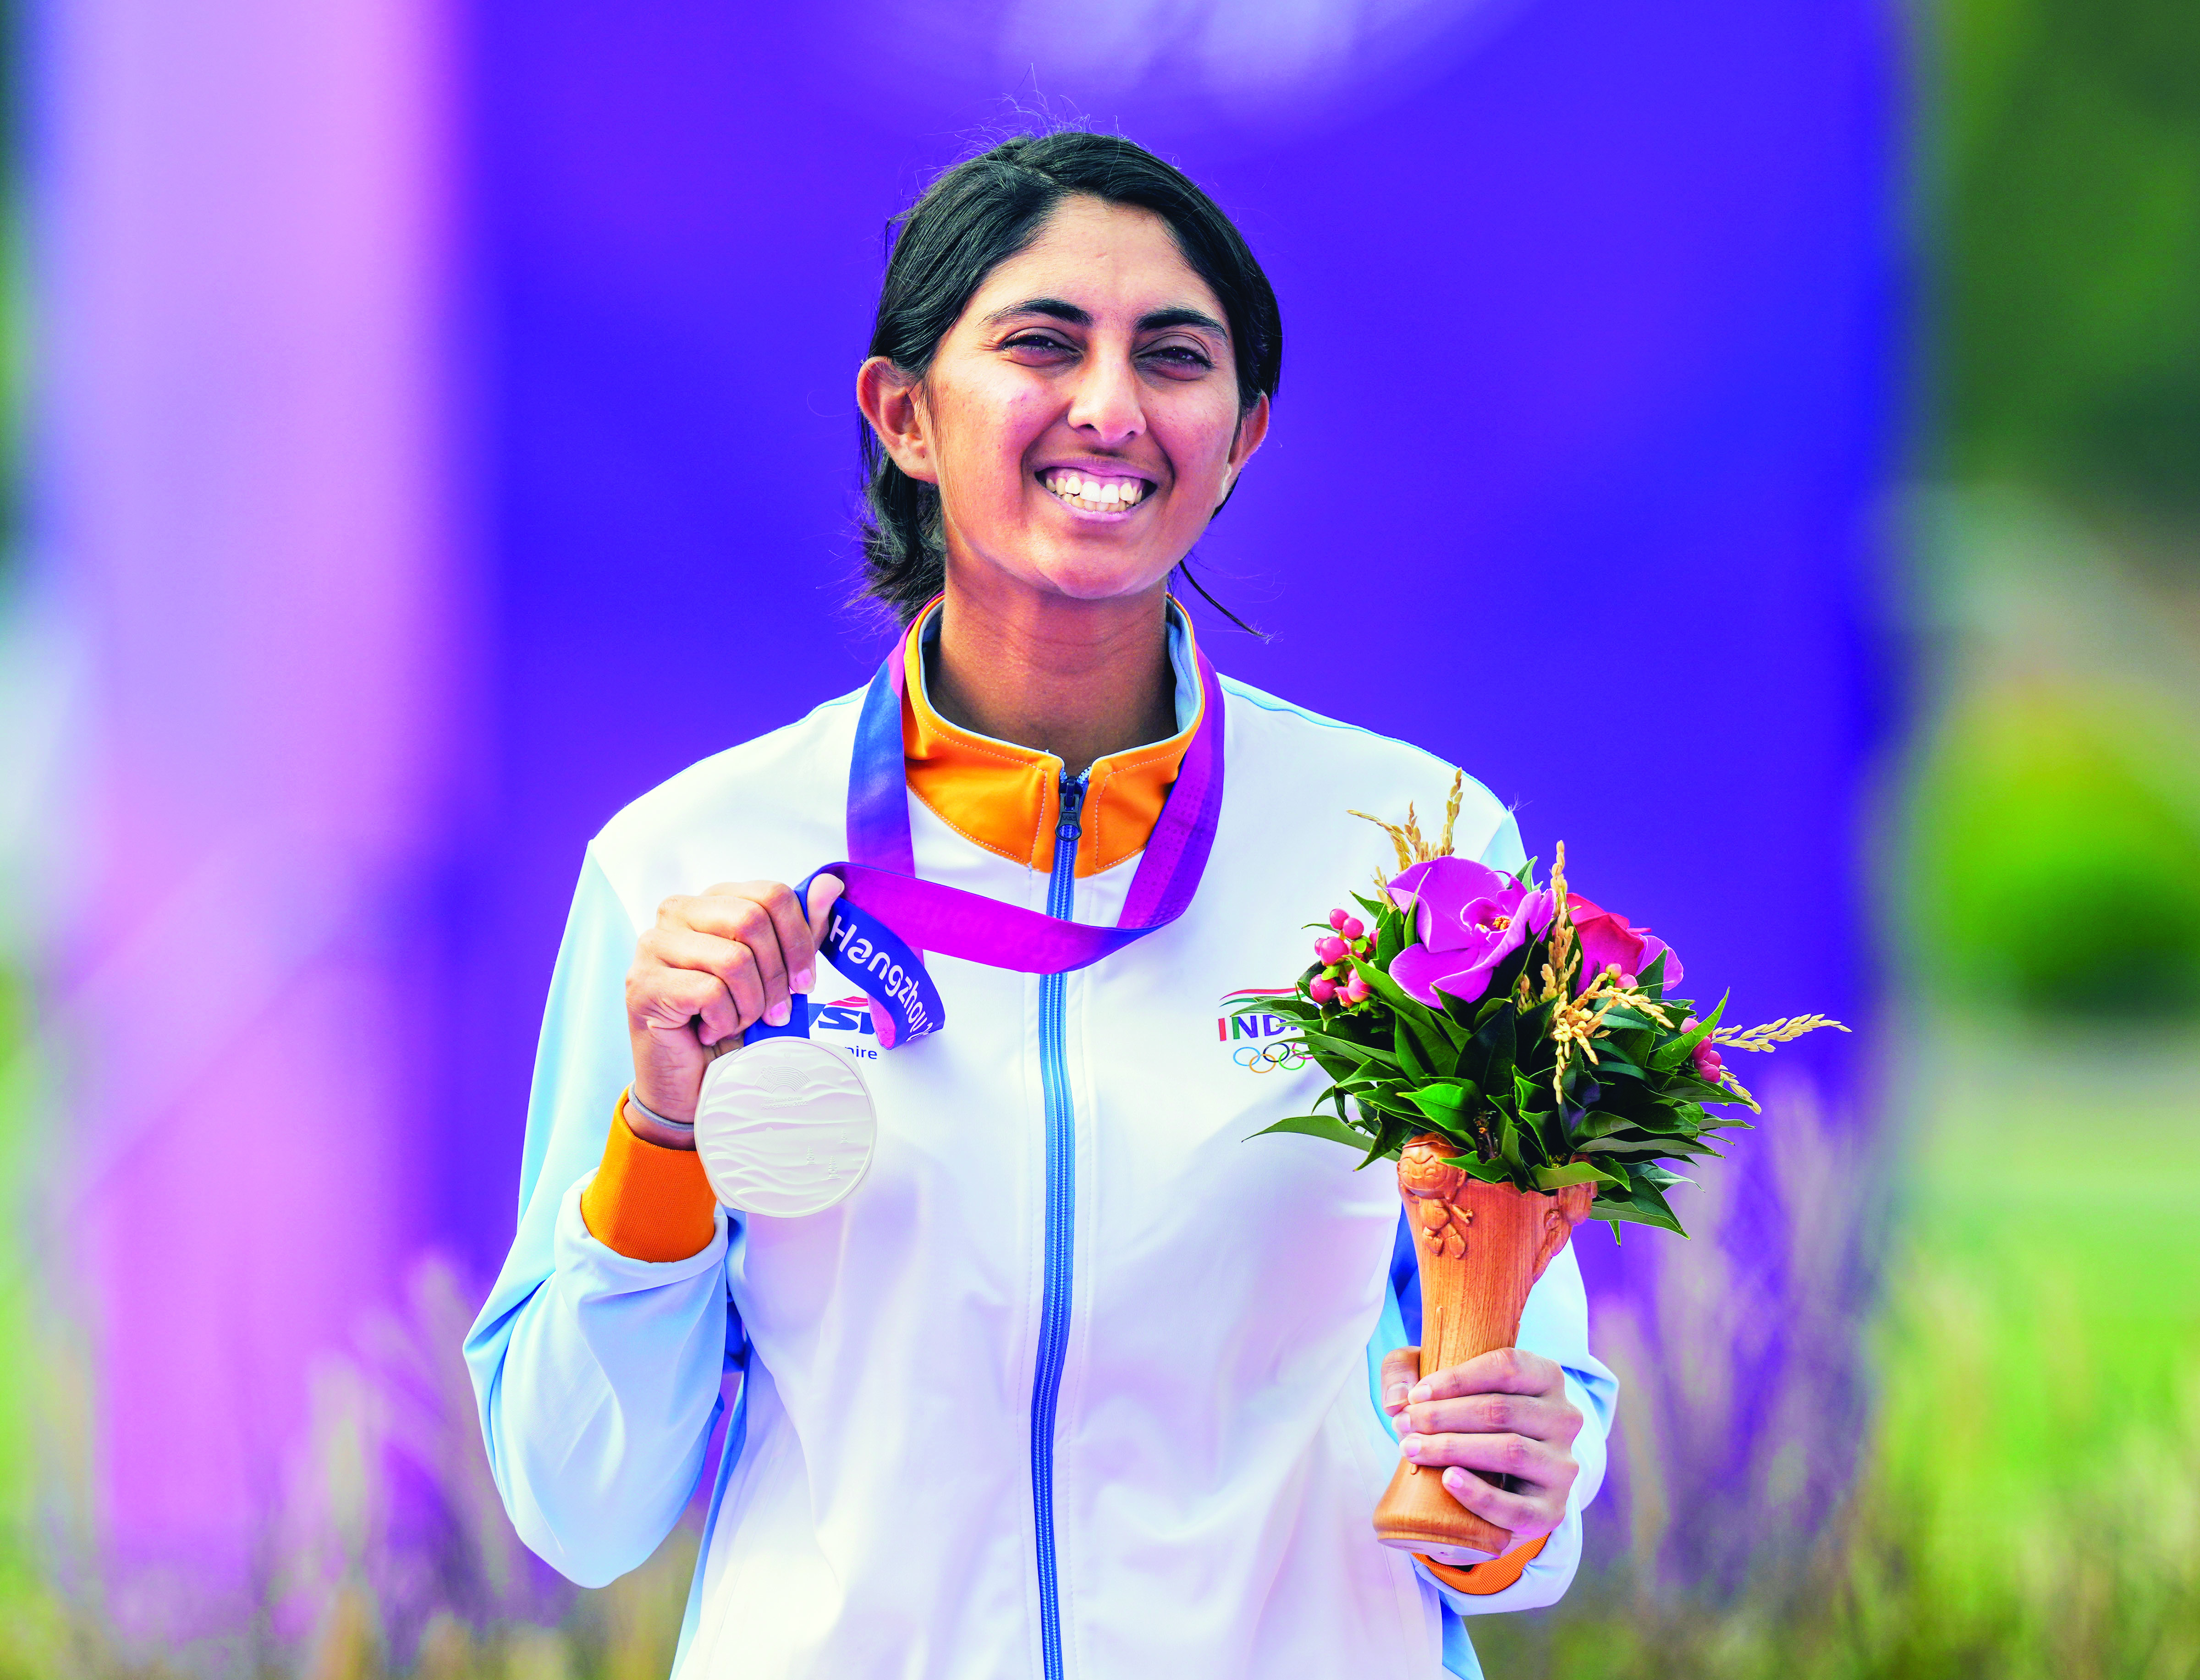 Women’s golf: Aditi Ashok slips on final day, signs off with silver